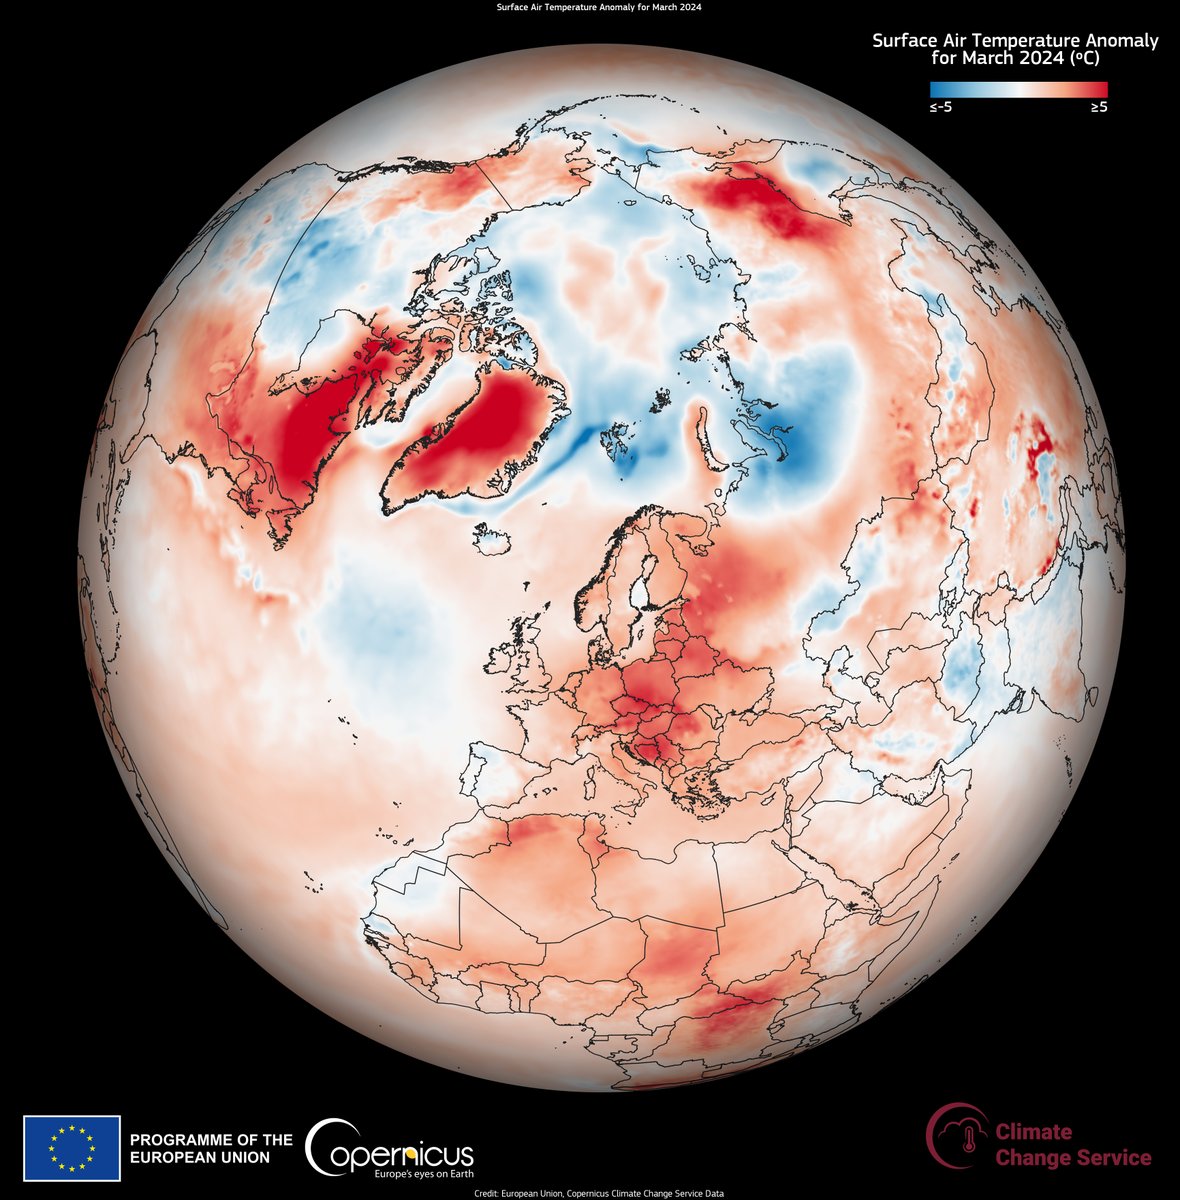 #ImageOfTheDay According to the latest monthly climate bulletin of our #CopernicusClimate Change Service: 📈March 2024 was the second warmest March on record in Europe, with 2.12°C above the 1991-2020 average ♨️ Read more at climate.copernicus.eu/climate-bullet…